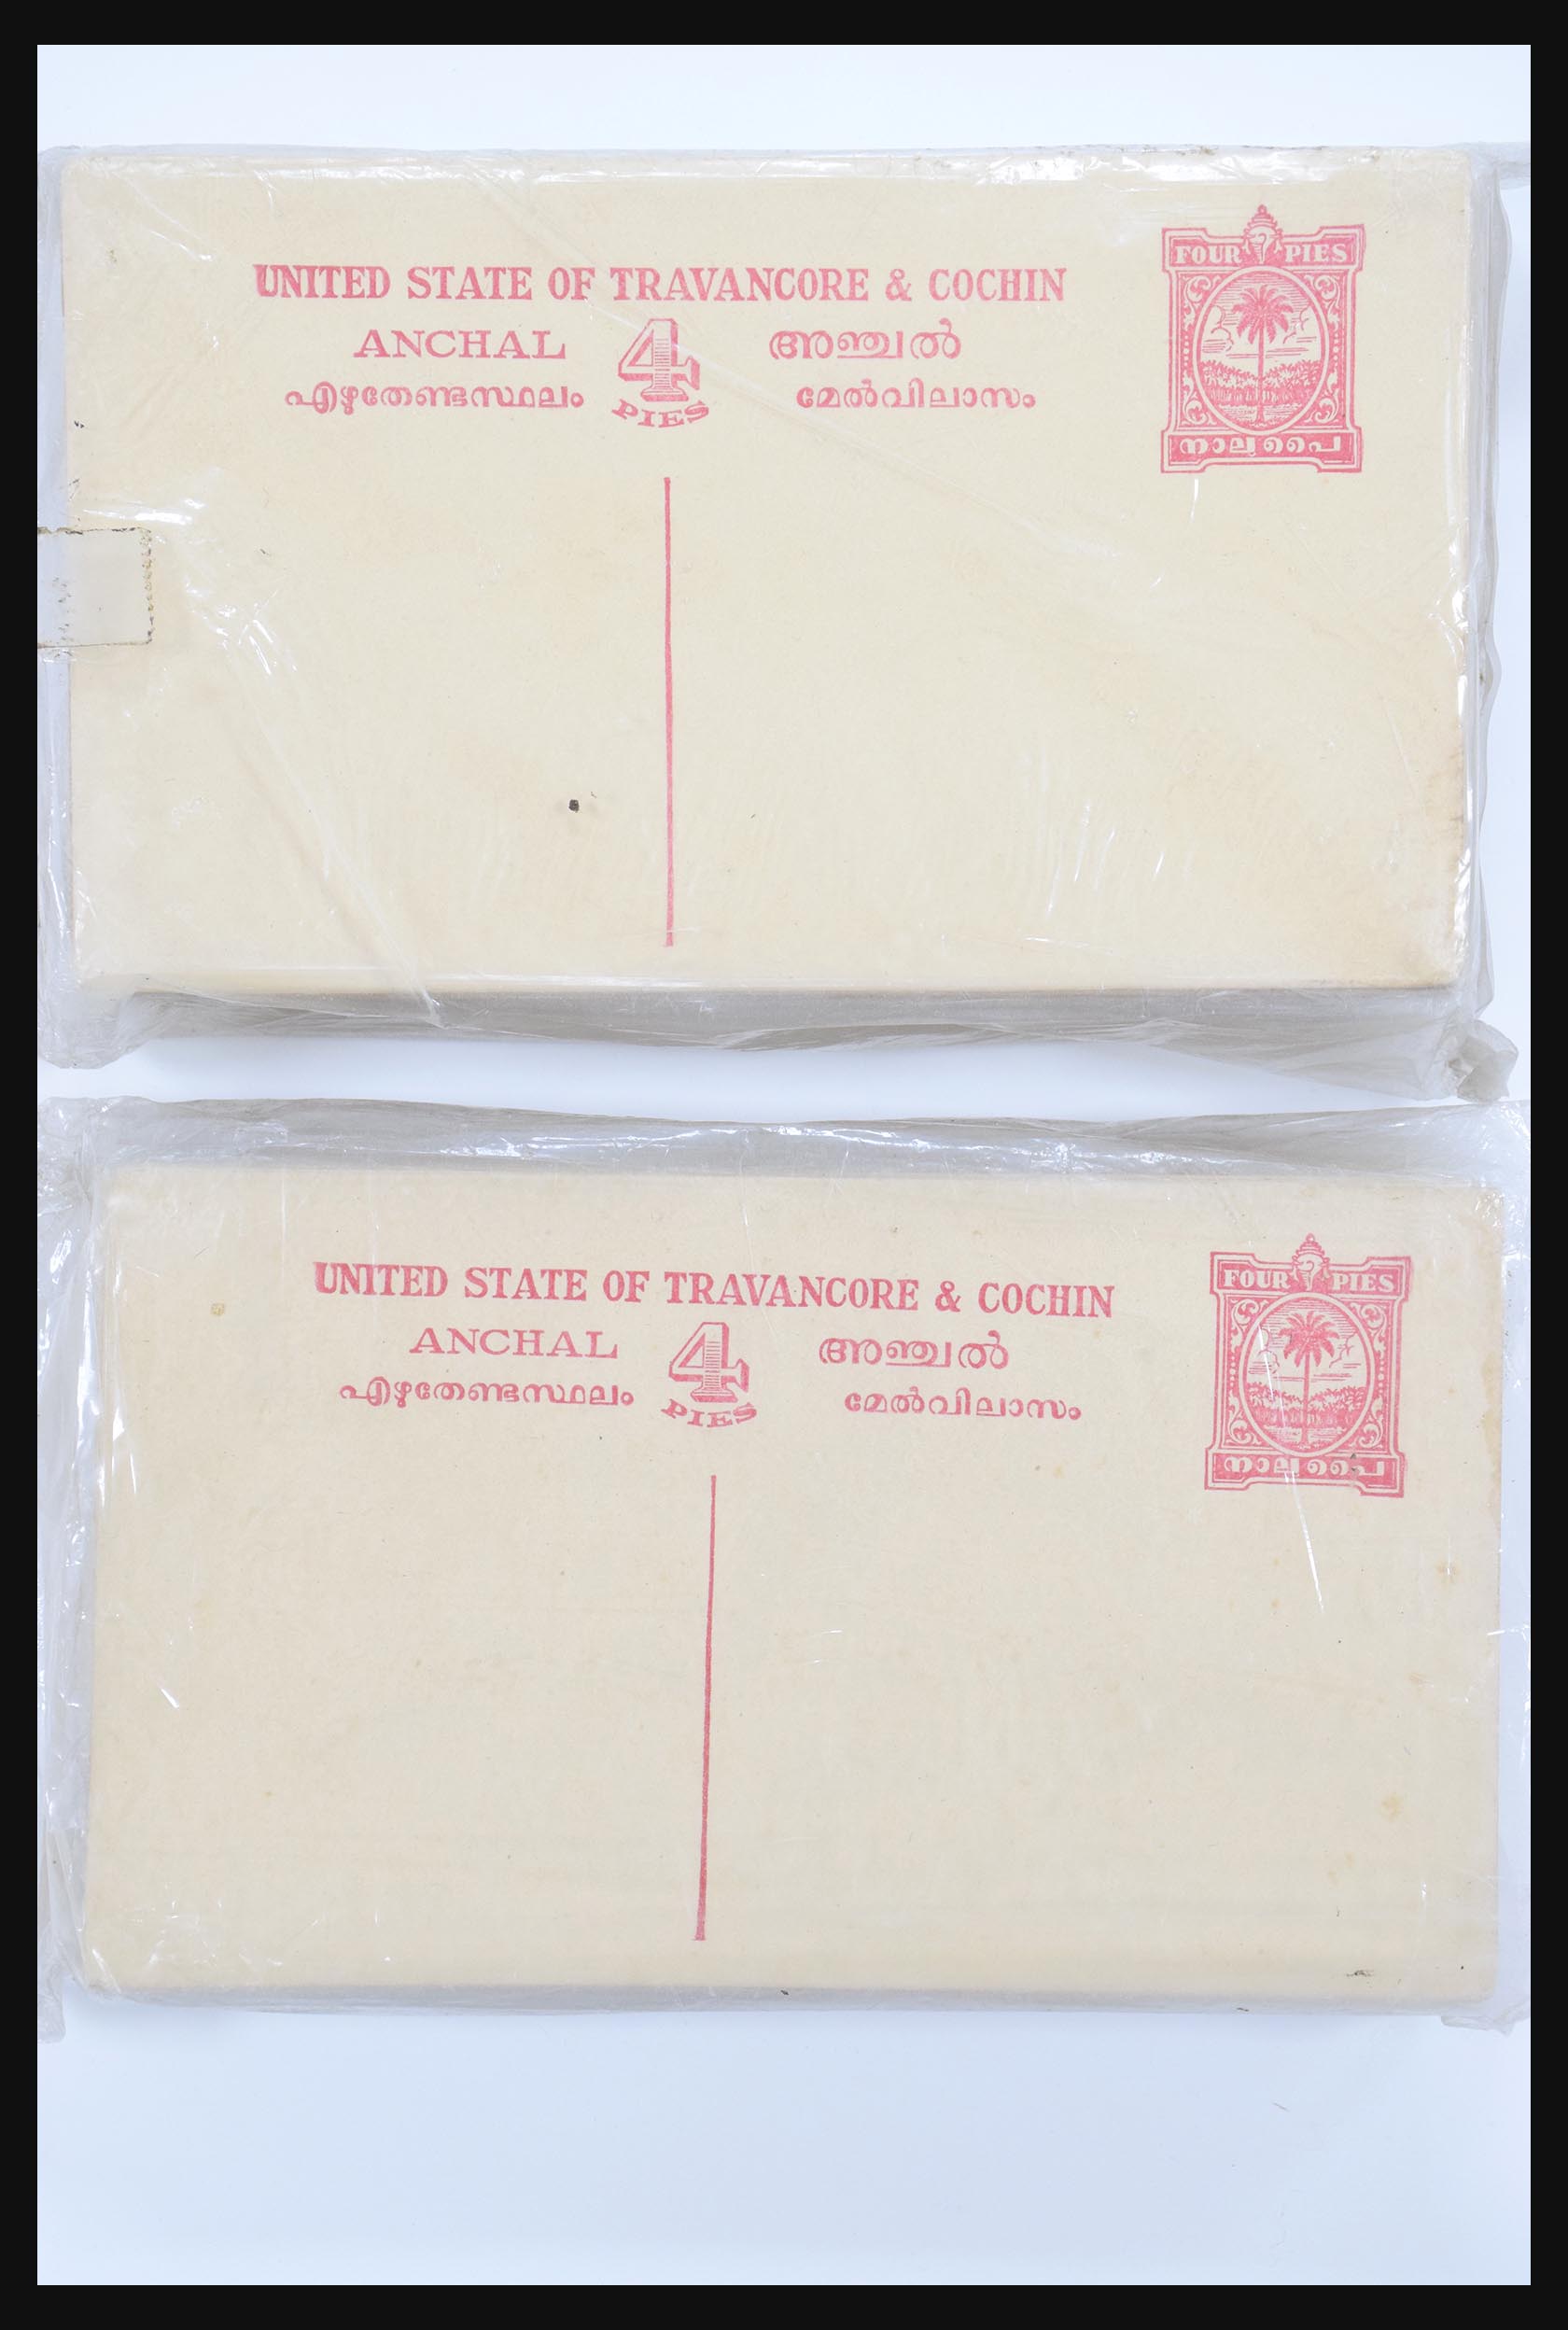 30686 090 - 30686 India and states covers 1900-1945.